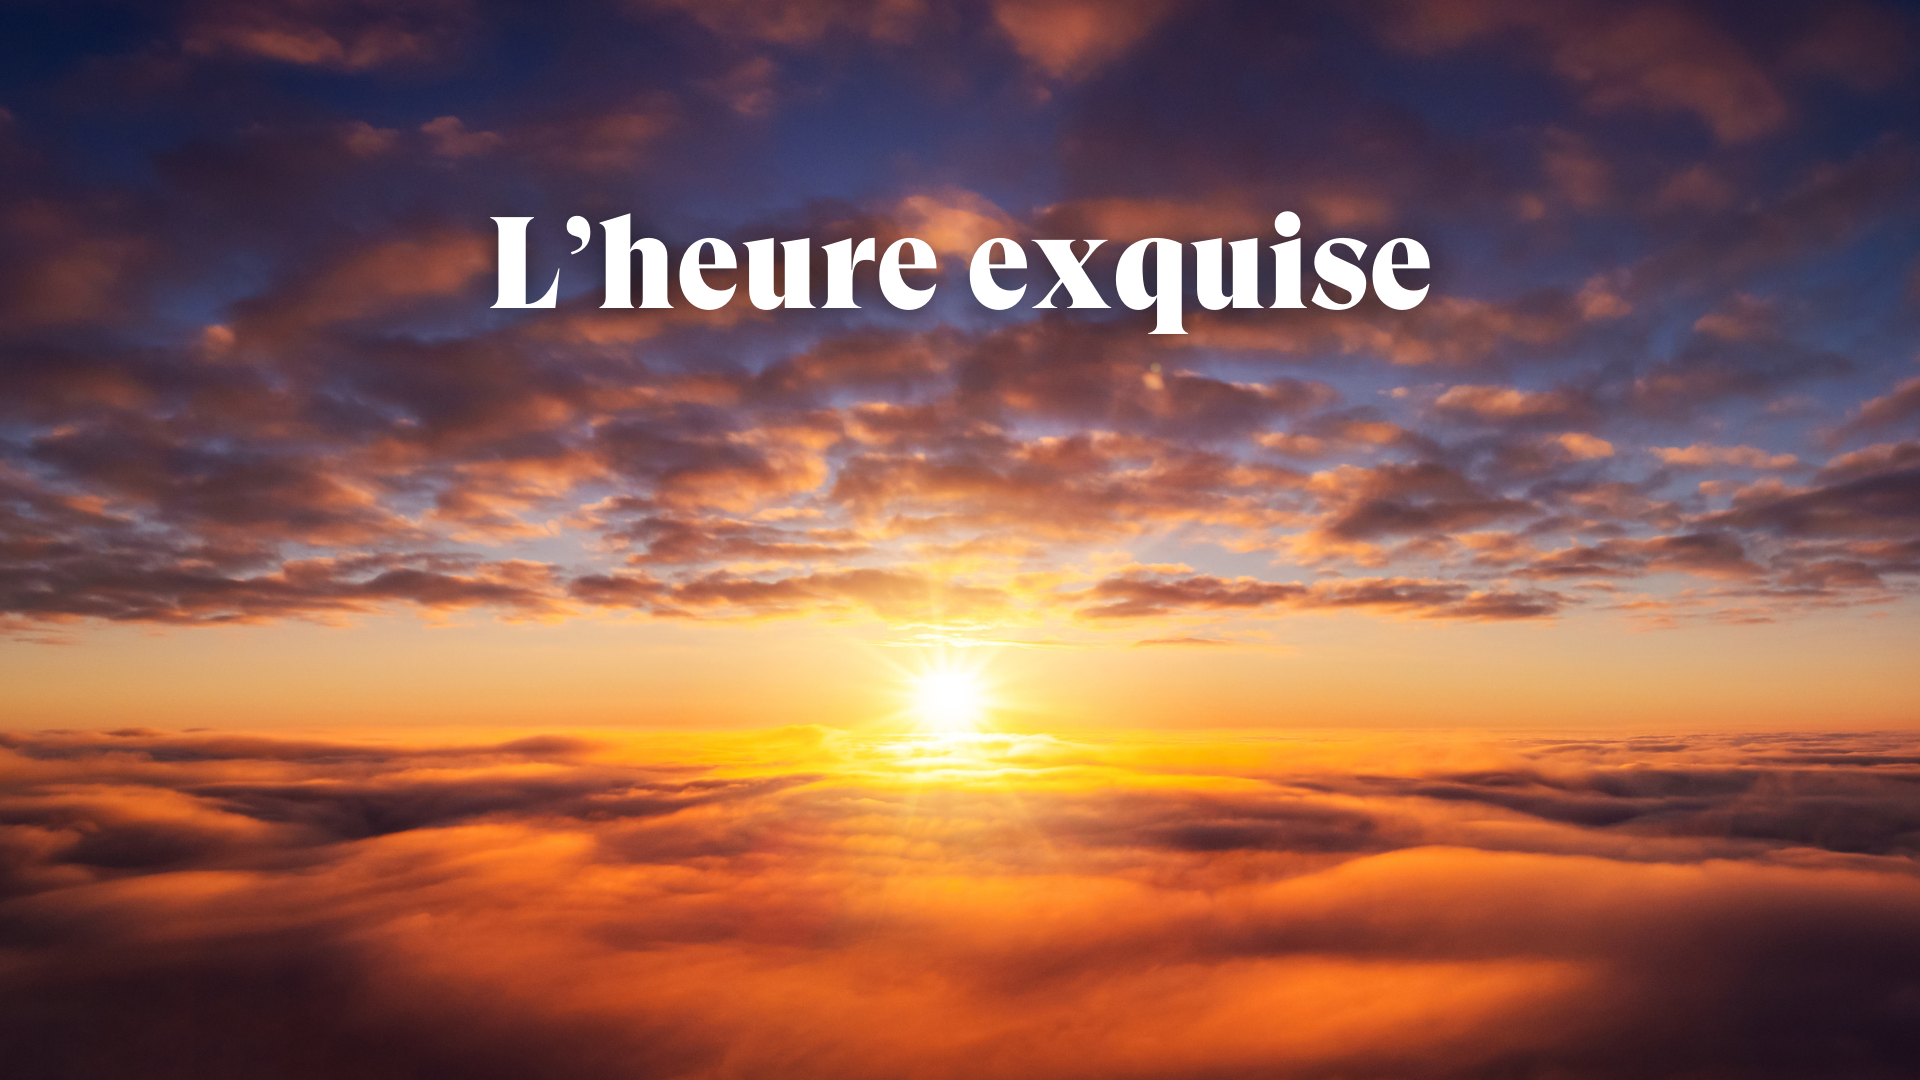 L’heure exquise